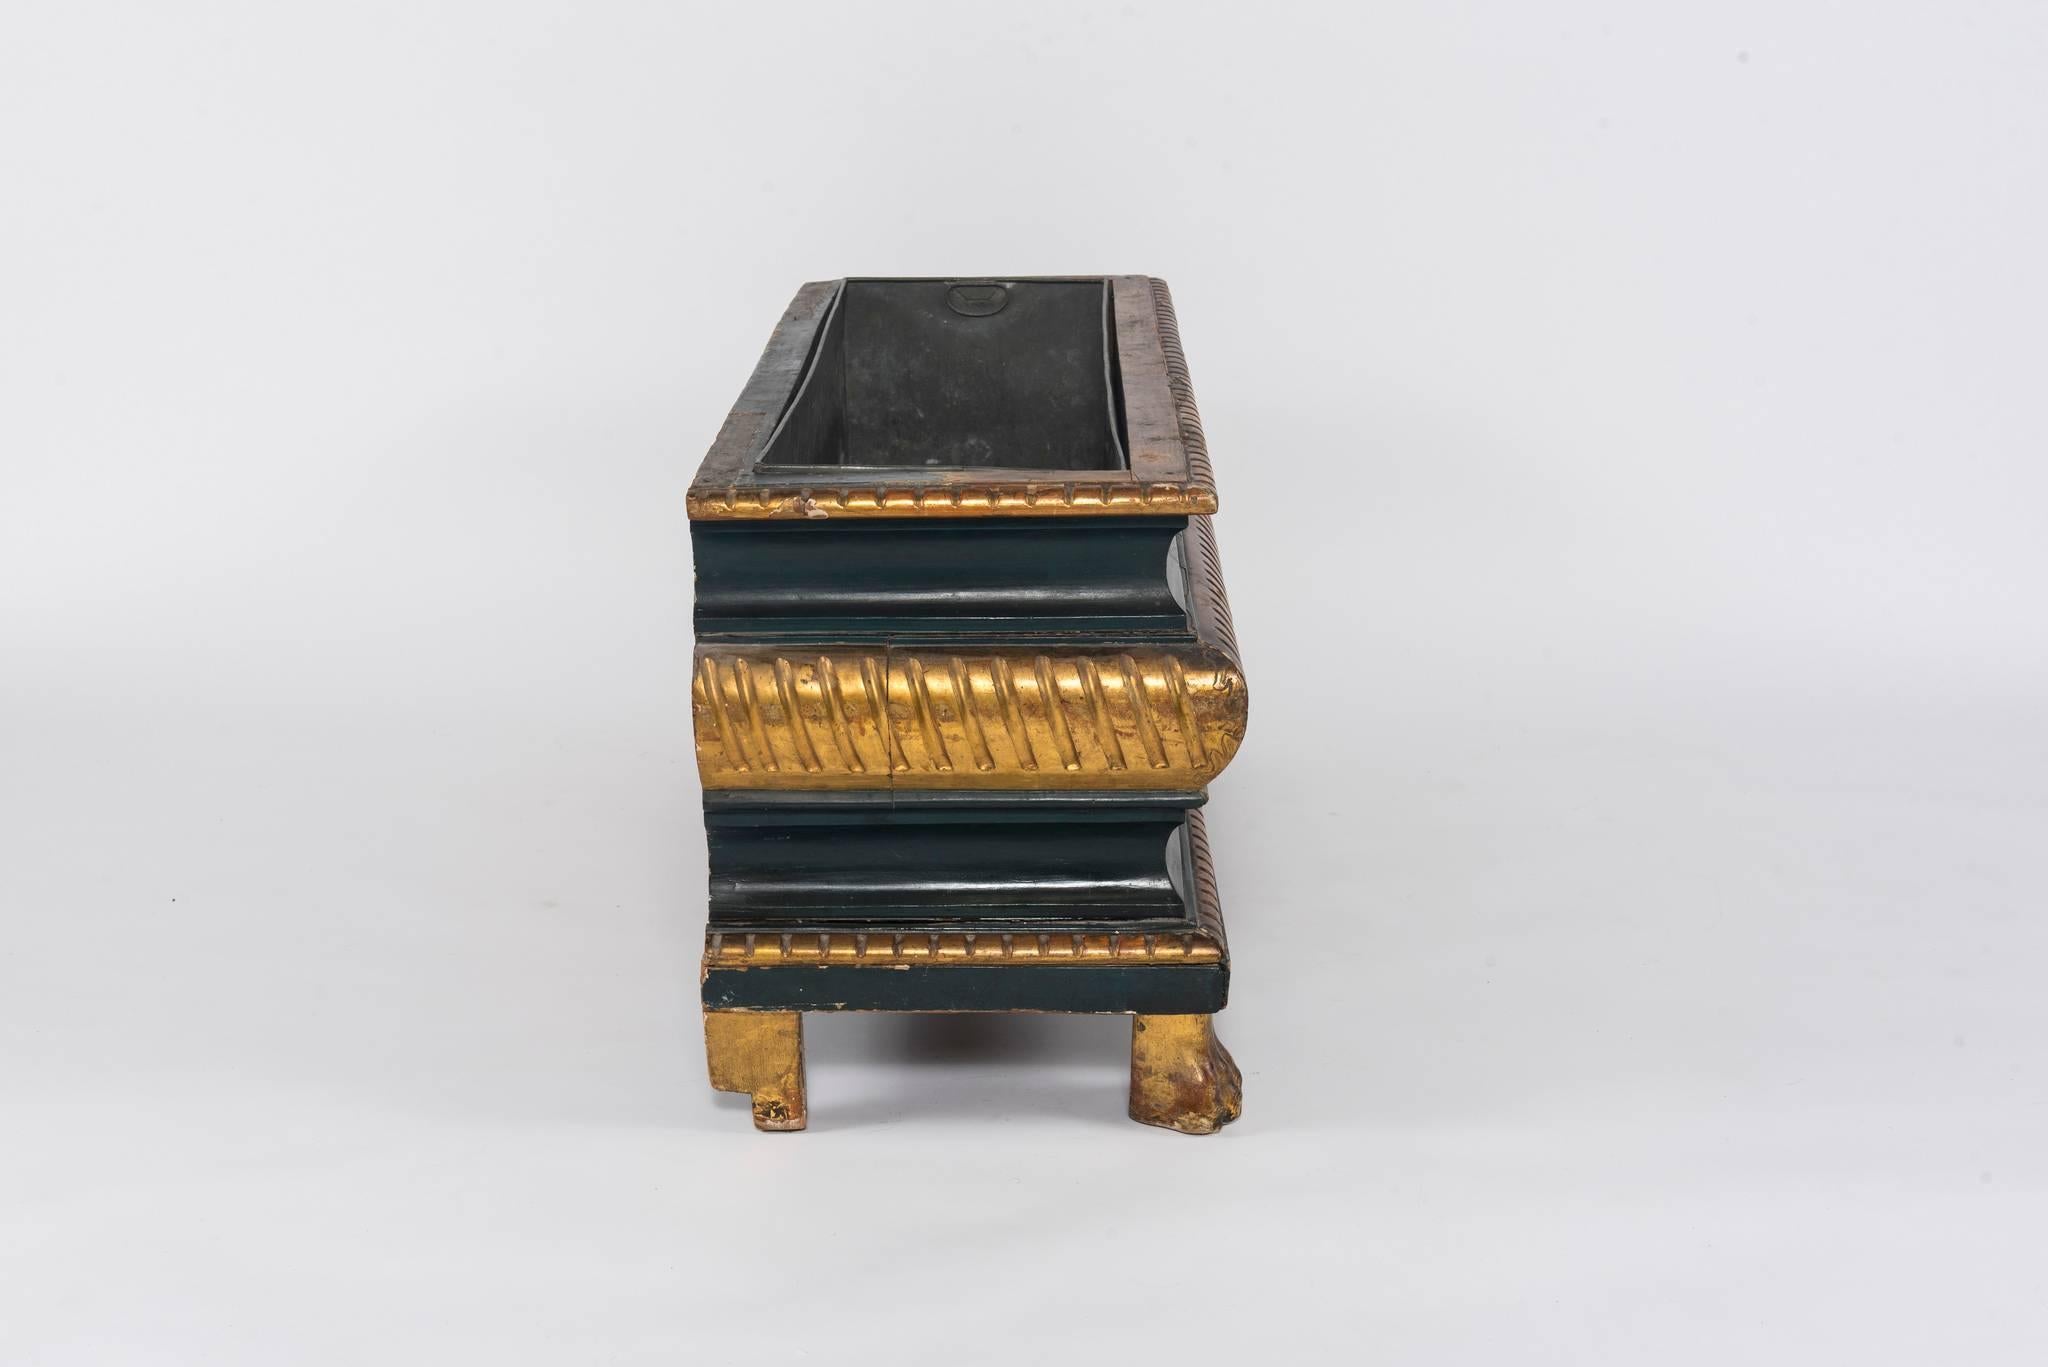 19th century Italian painted and giltwood jardinière with lion's foot detailing and metal liner.